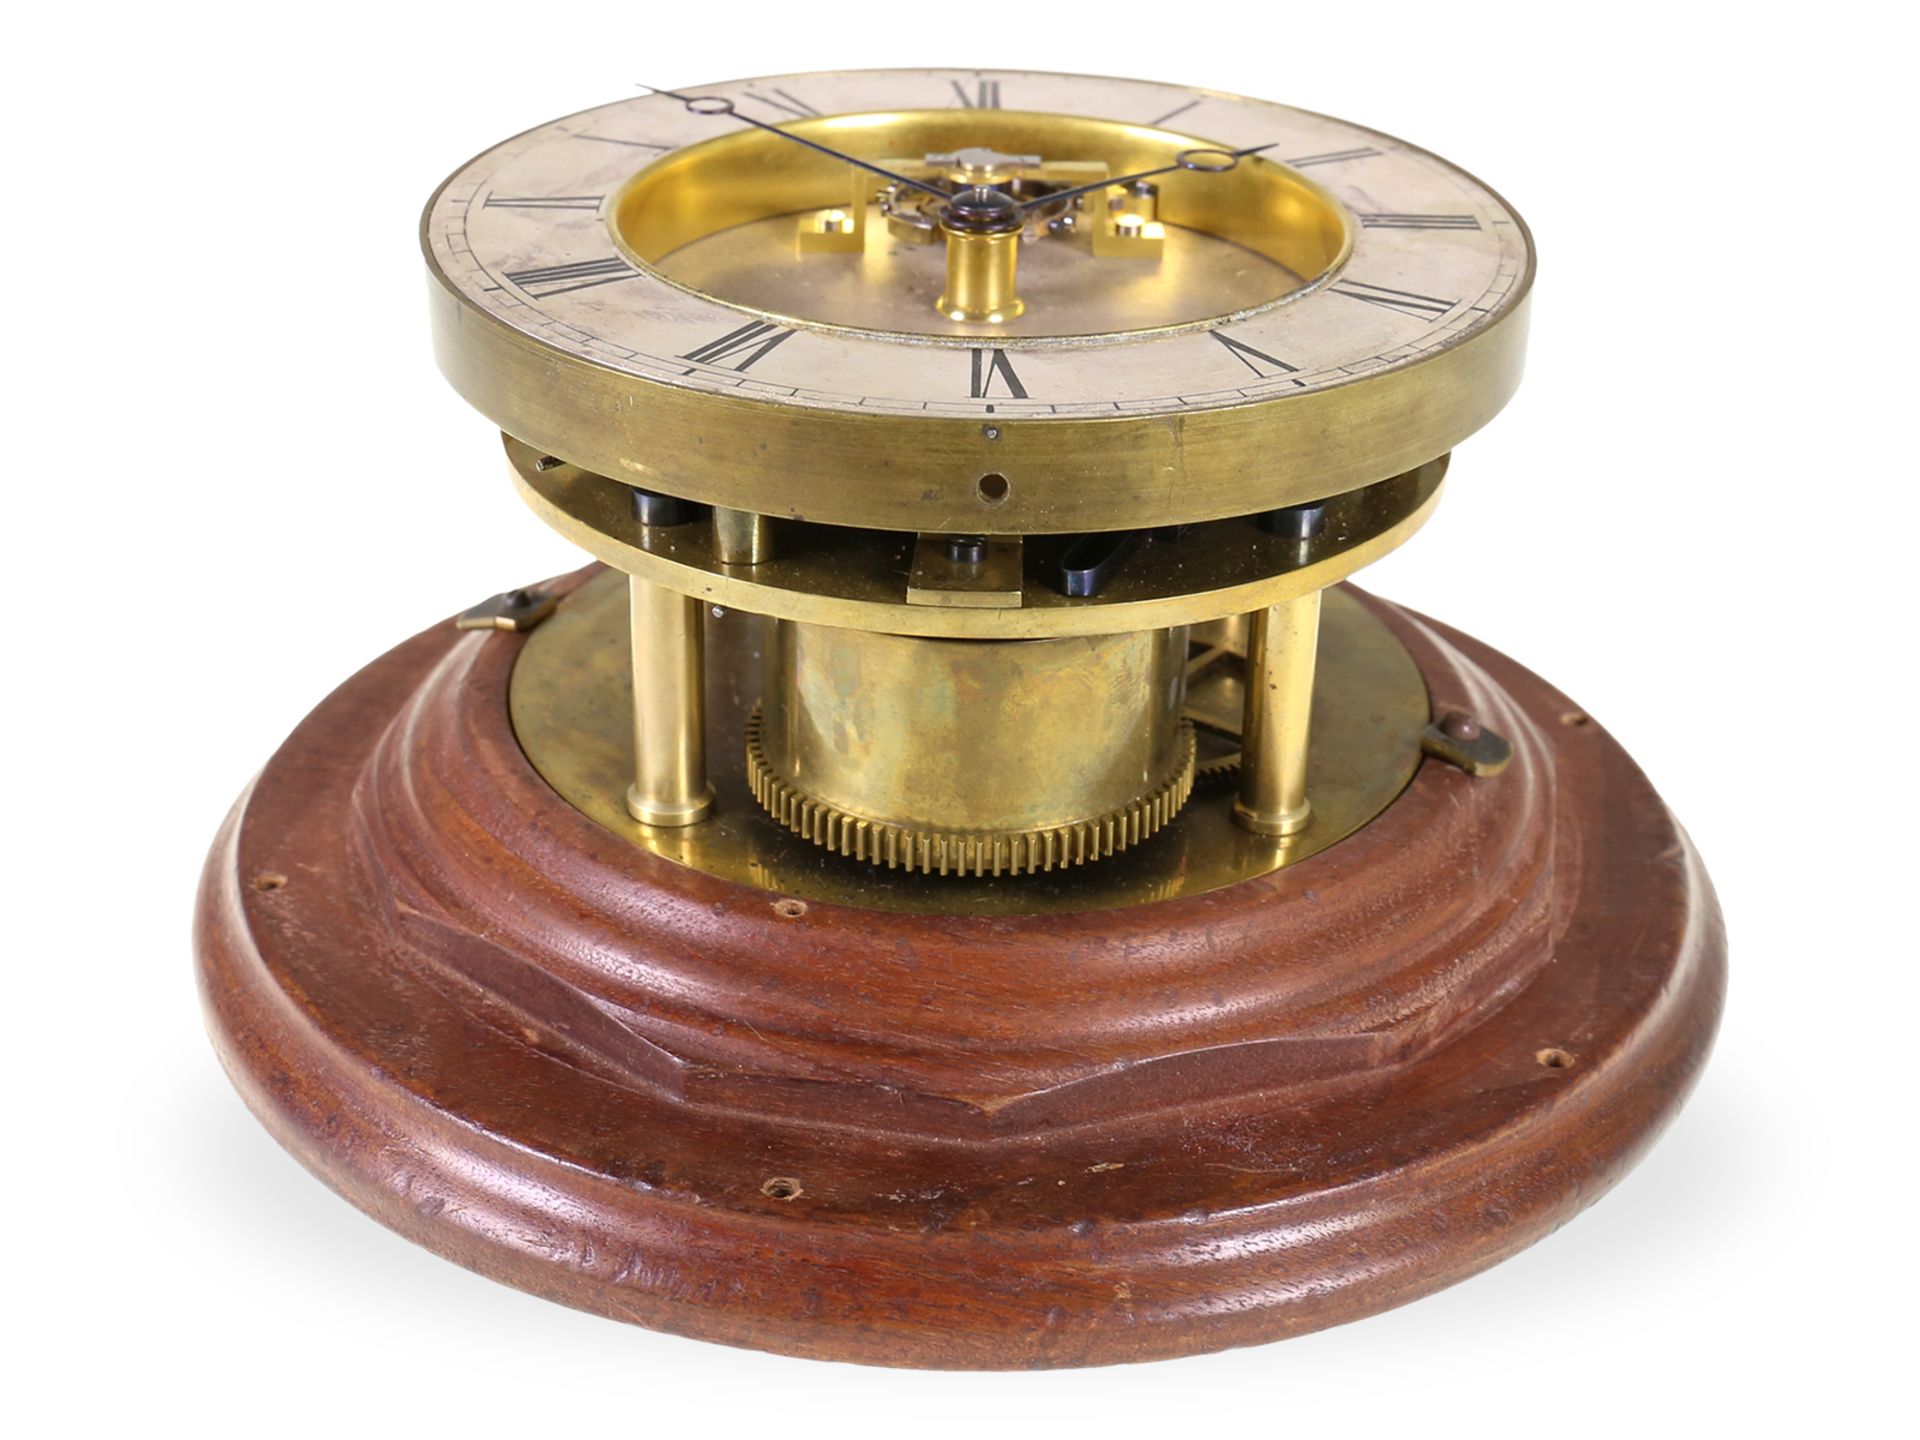 Unusual table chronometer/escapement model, possibly around 1840 - Image 3 of 4